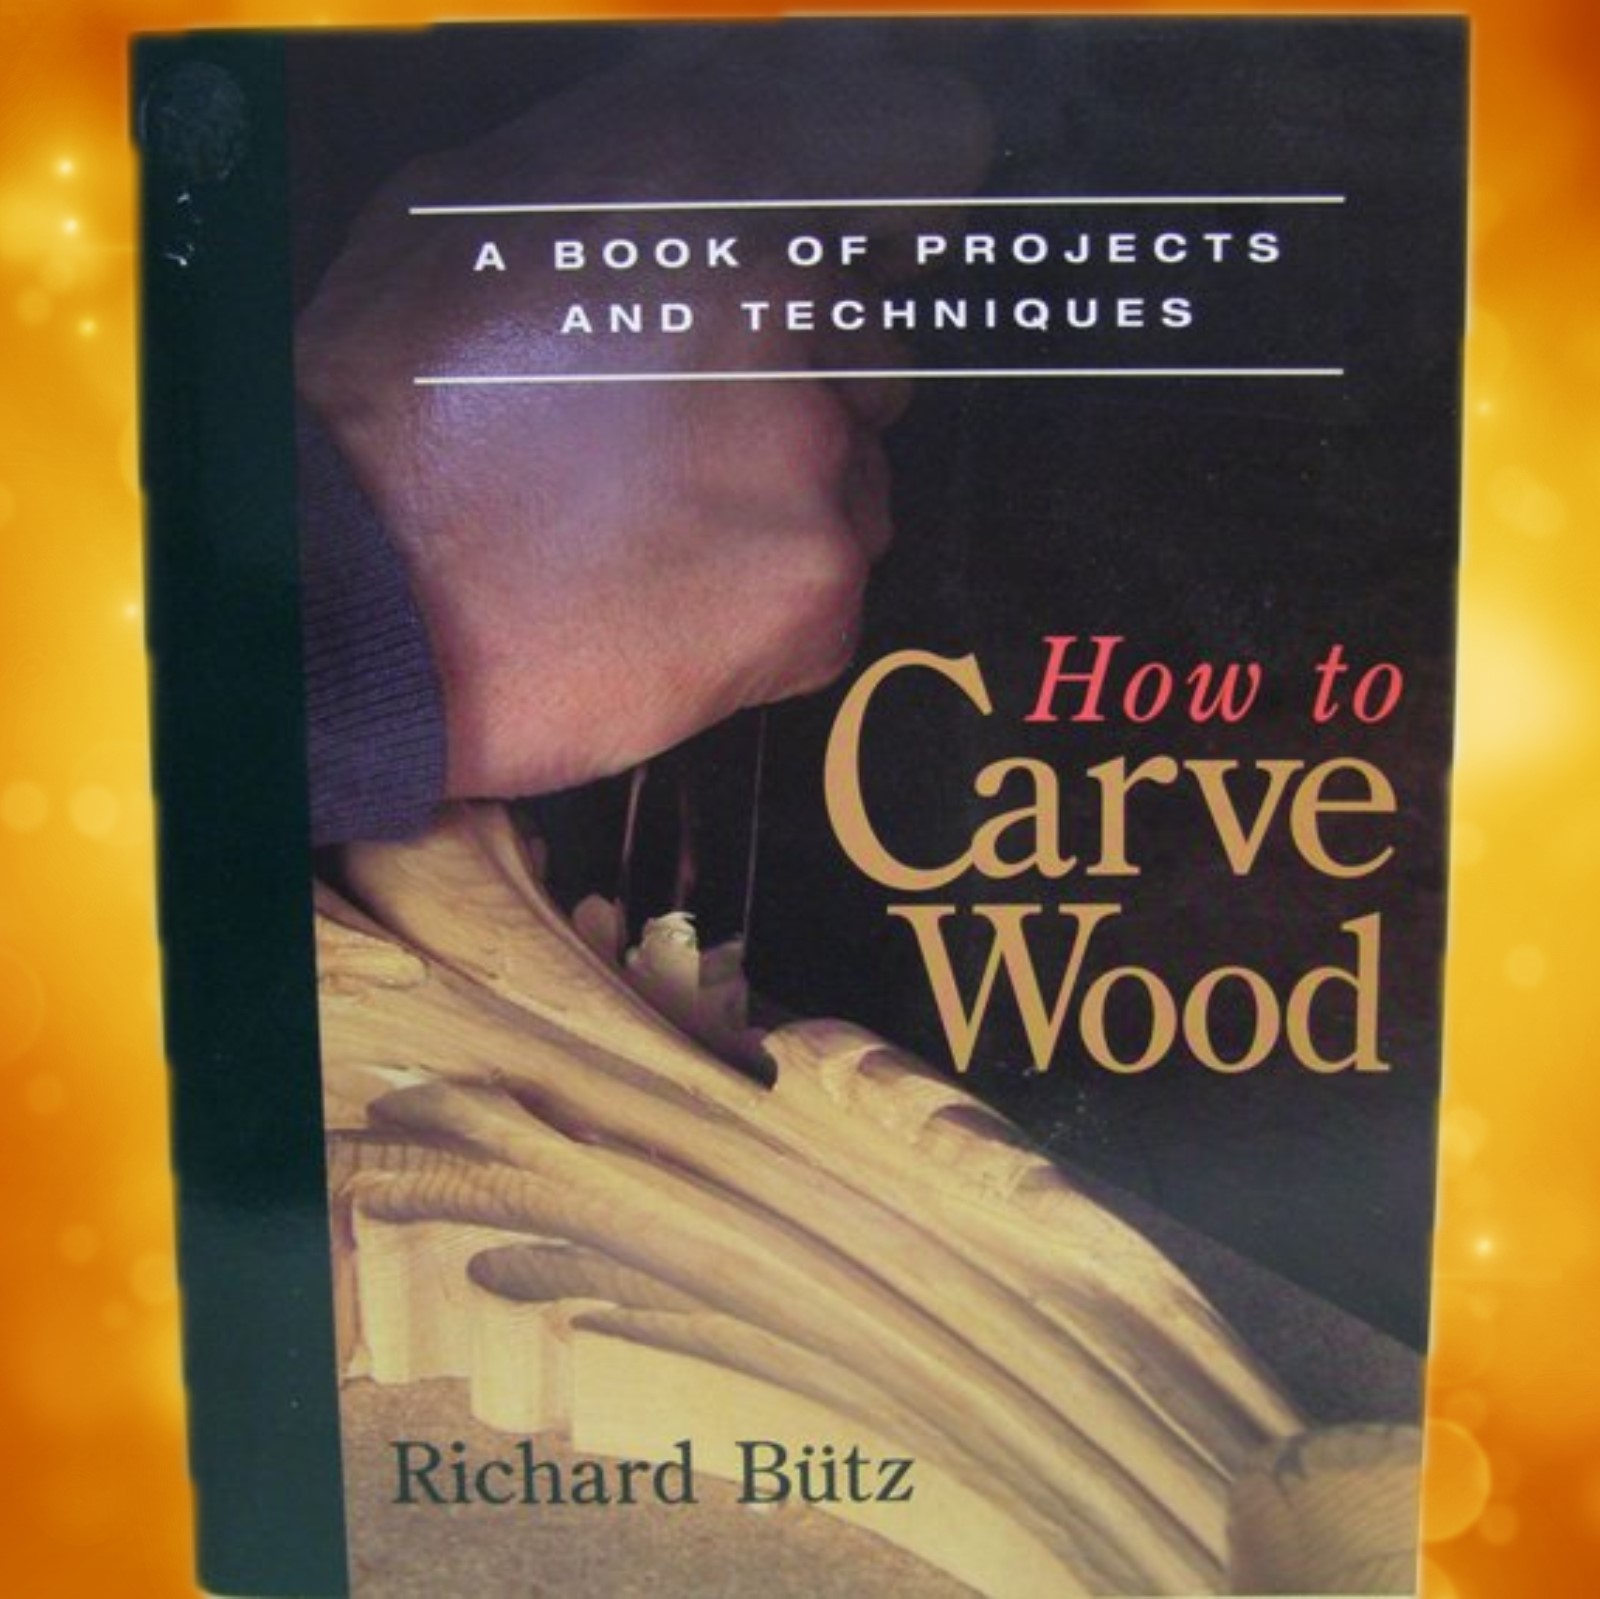 How To Carve Wood- Richard Butz ISBN0-918804-20-5